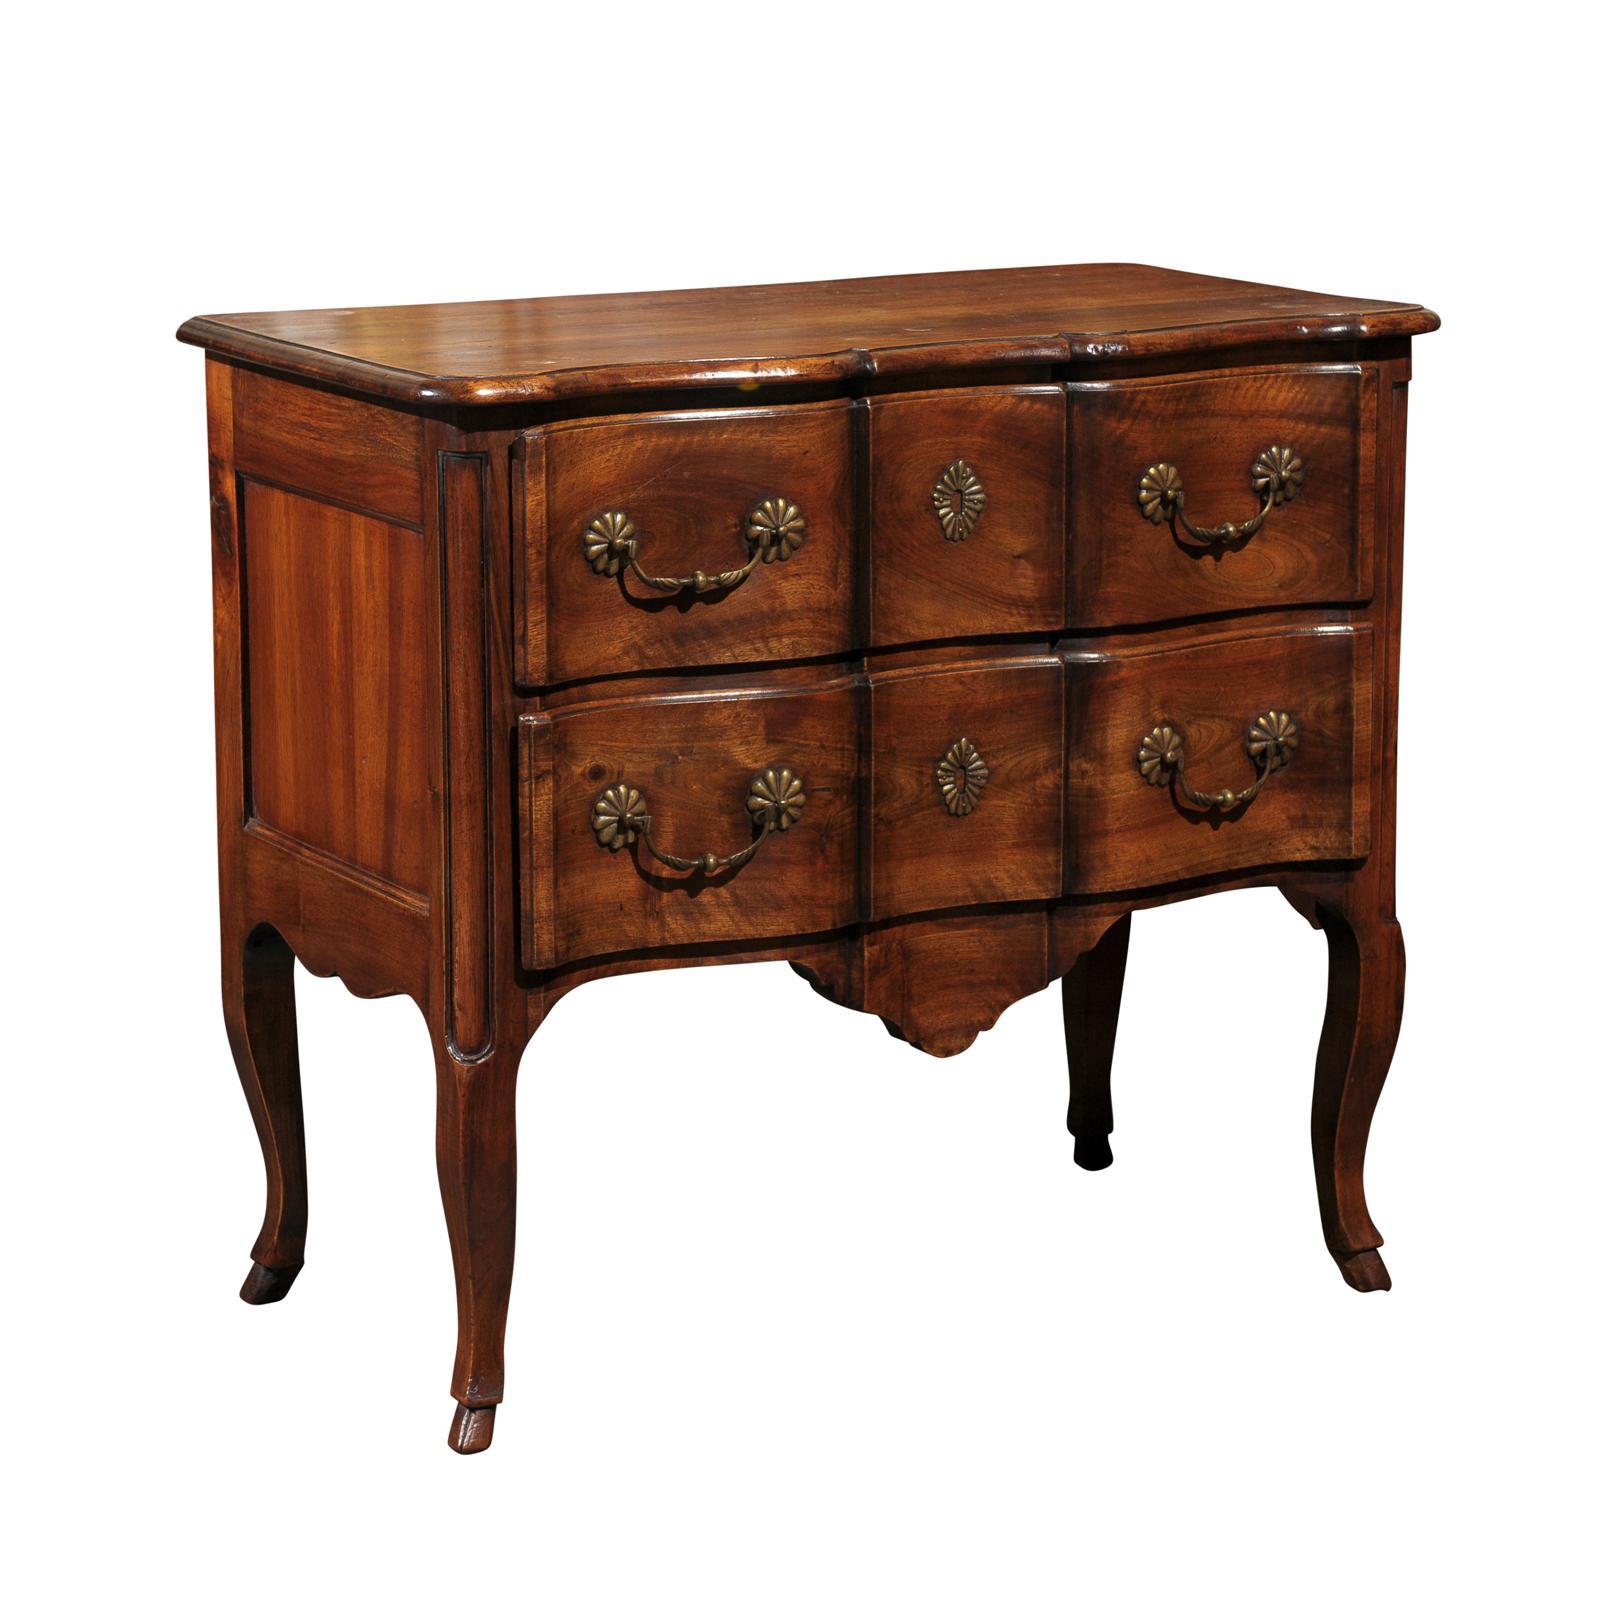 French 1840s Serpentine Two-Drawer Commode with Cabriole Legs and Carved Skirt